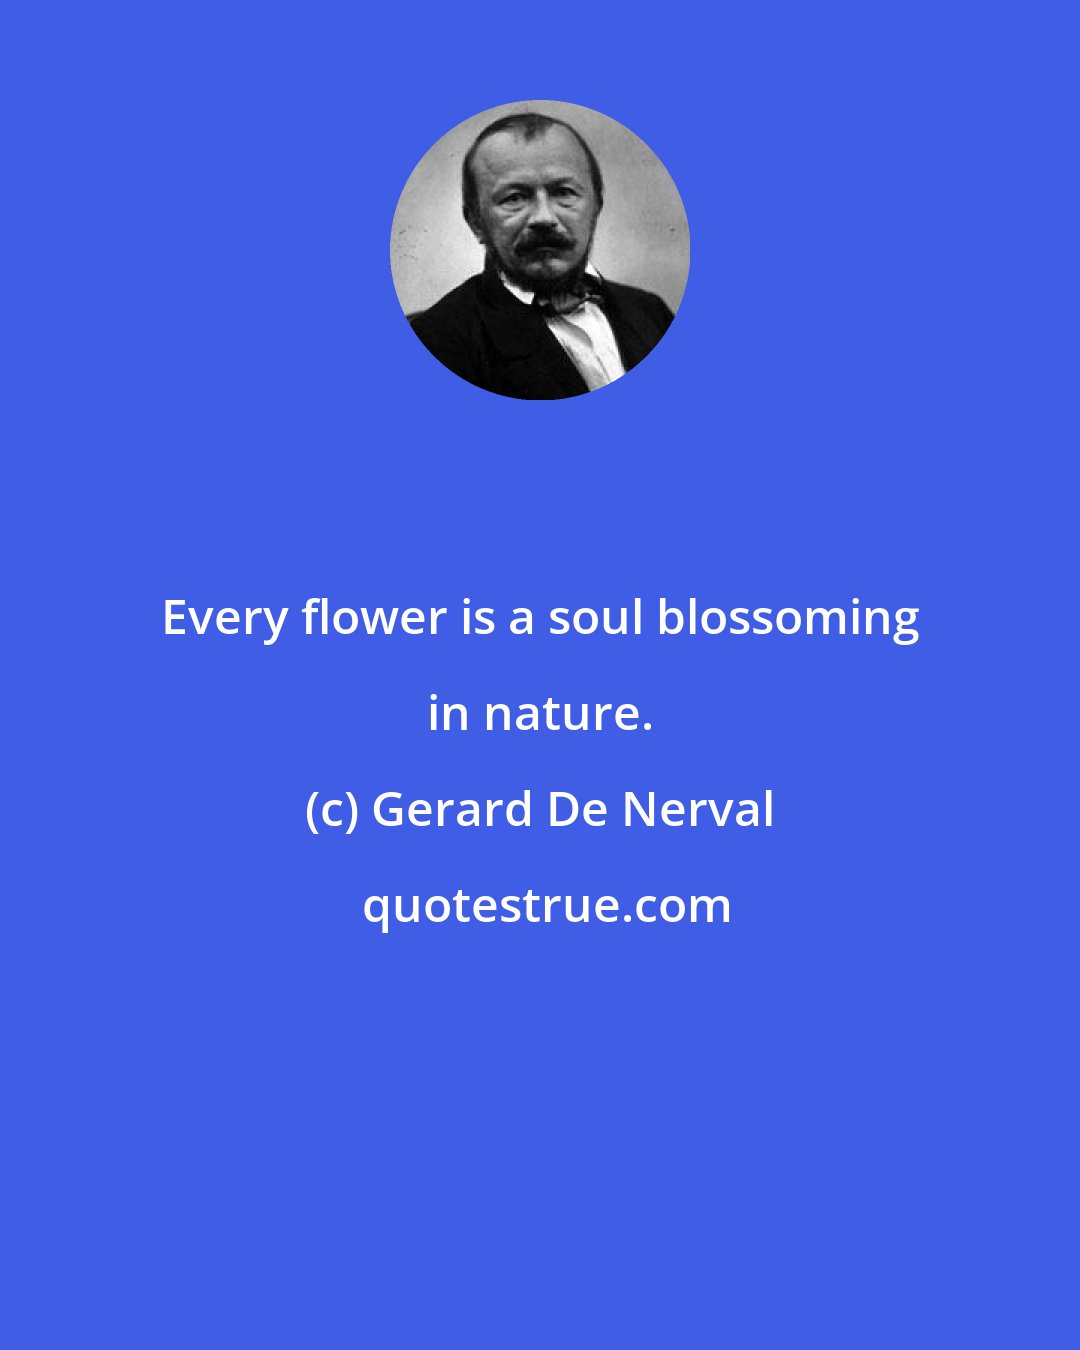 Gerard De Nerval: Every flower is a soul blossoming in nature.